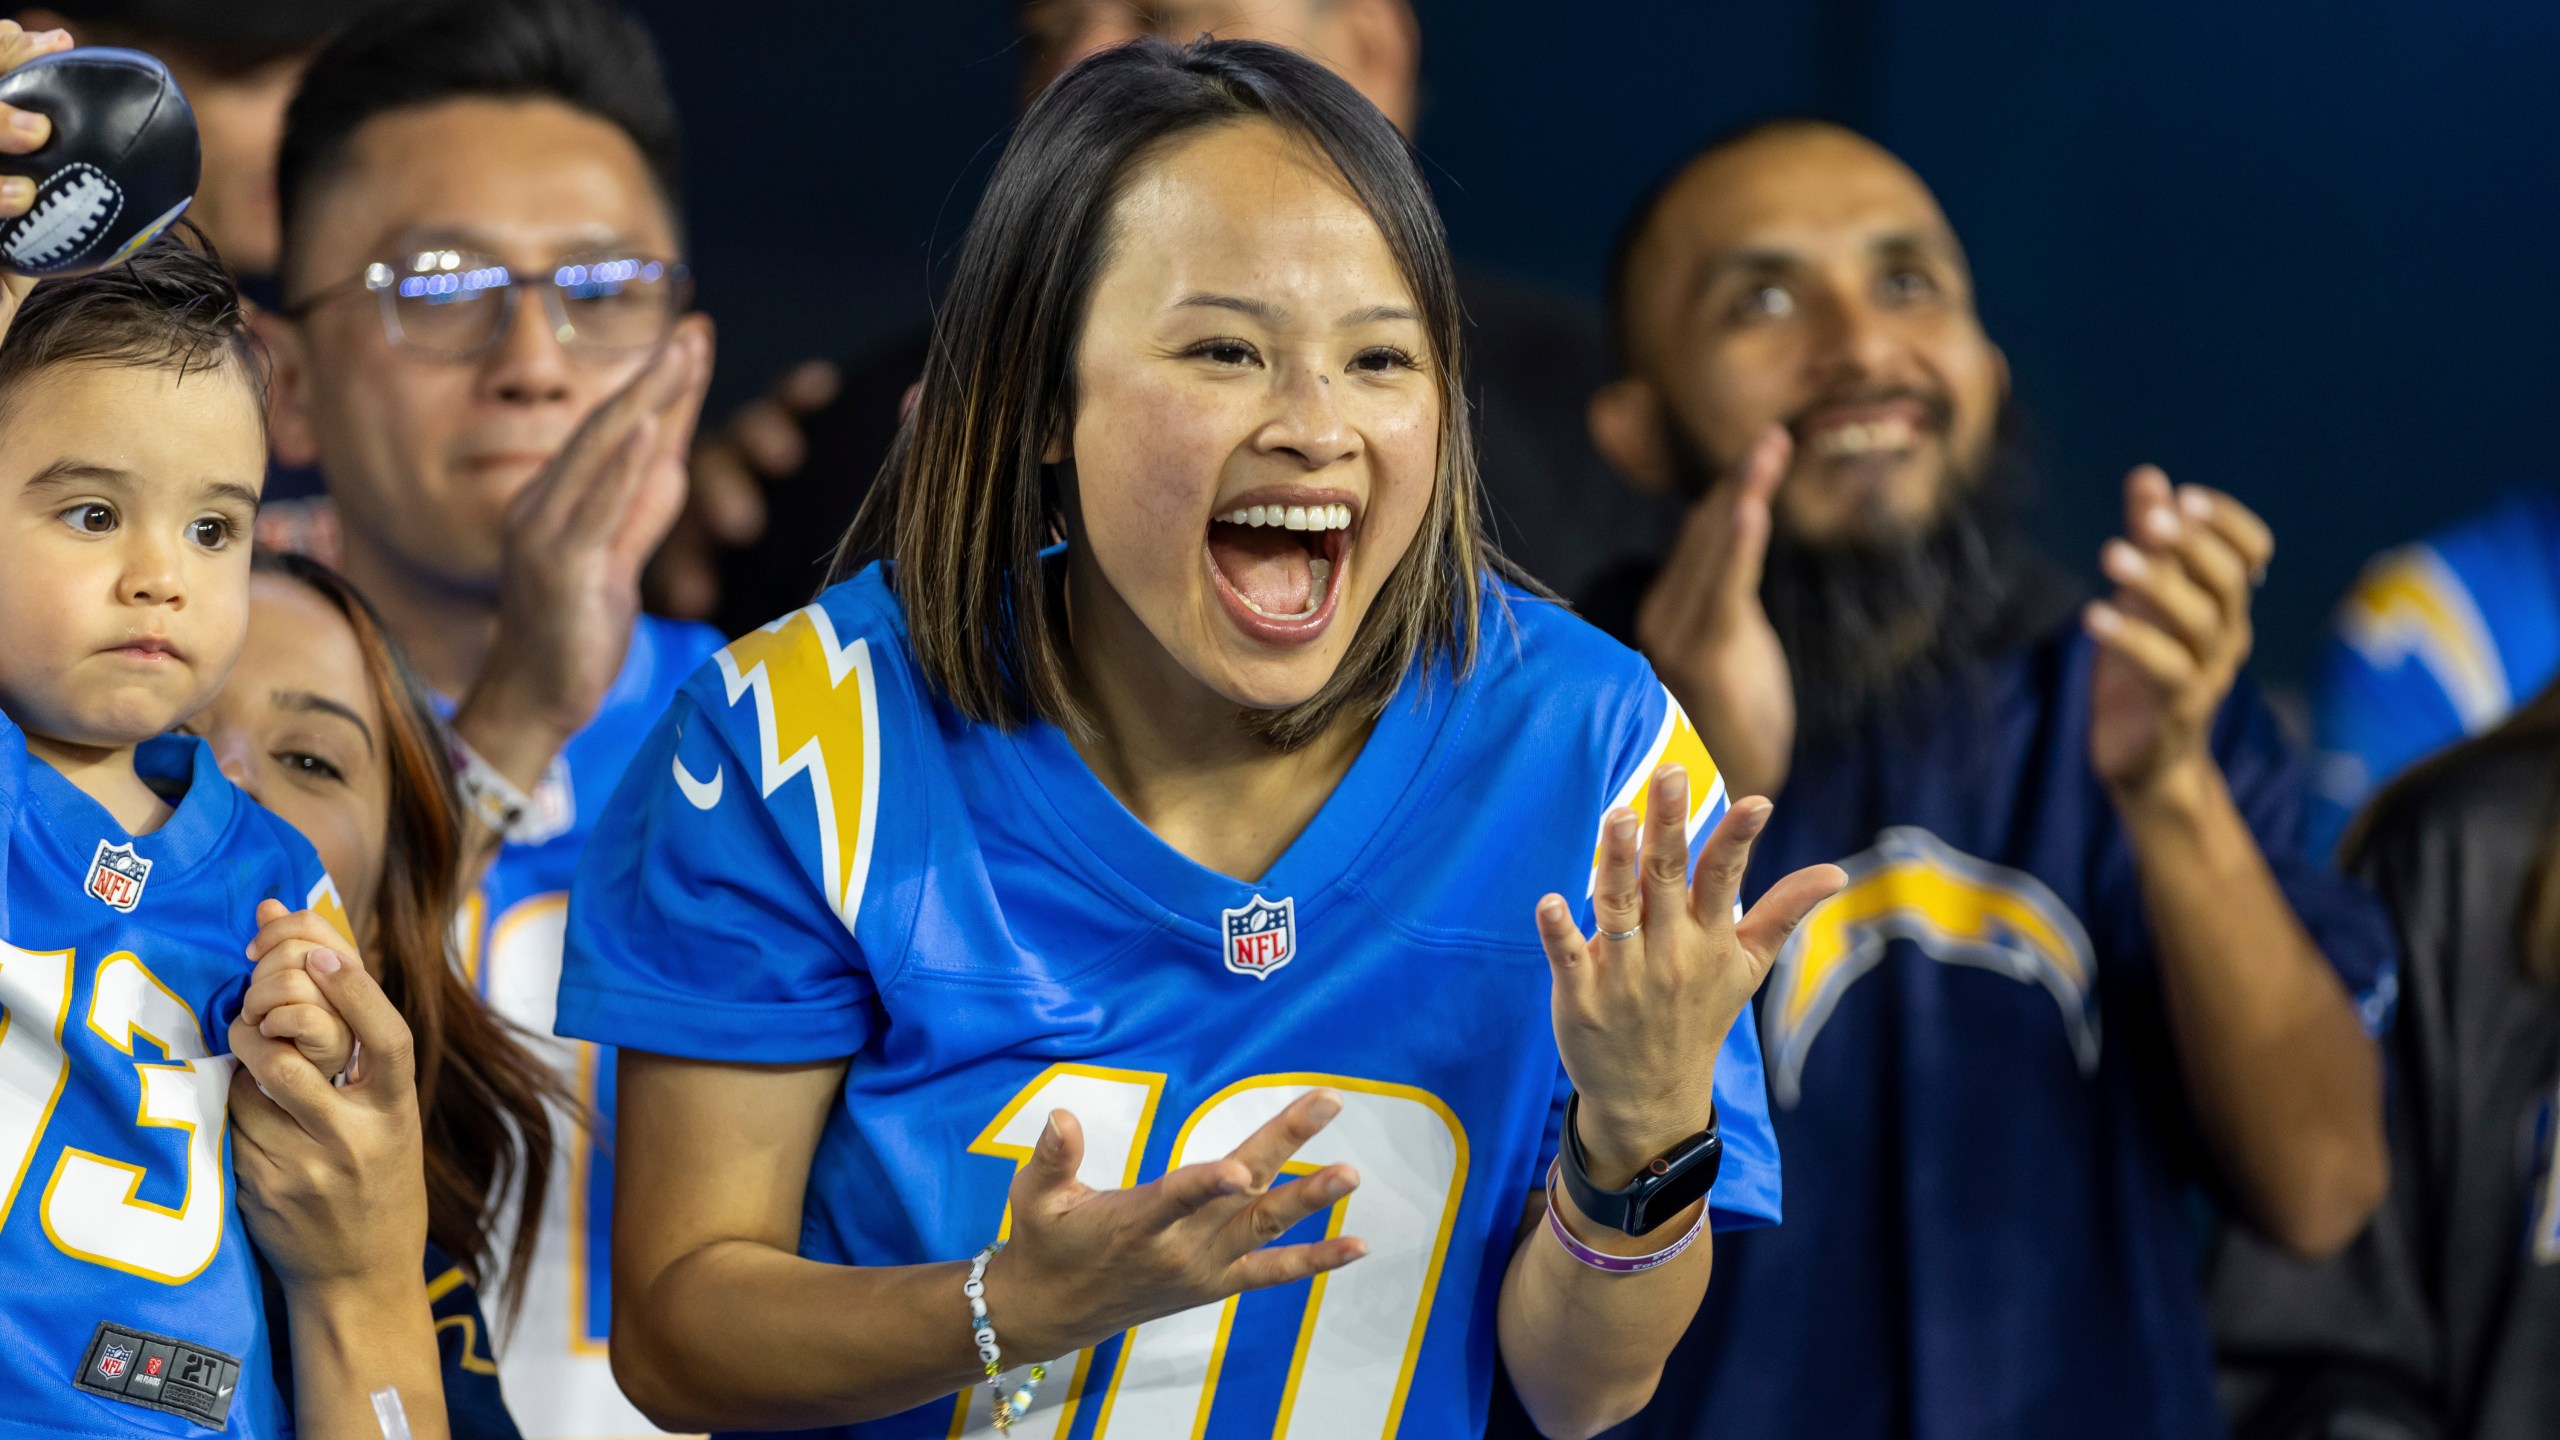 Los Angeles Chargers fan Merianne Do cheers for the Chargers while the Chargers play against the Chicago Bears in an NFL football game, Sunday, Oct. 29, 2023, in Inglewood, Calif. Chargers defeated the Bears 30-13. (AP Photo/Jeff Lewis)